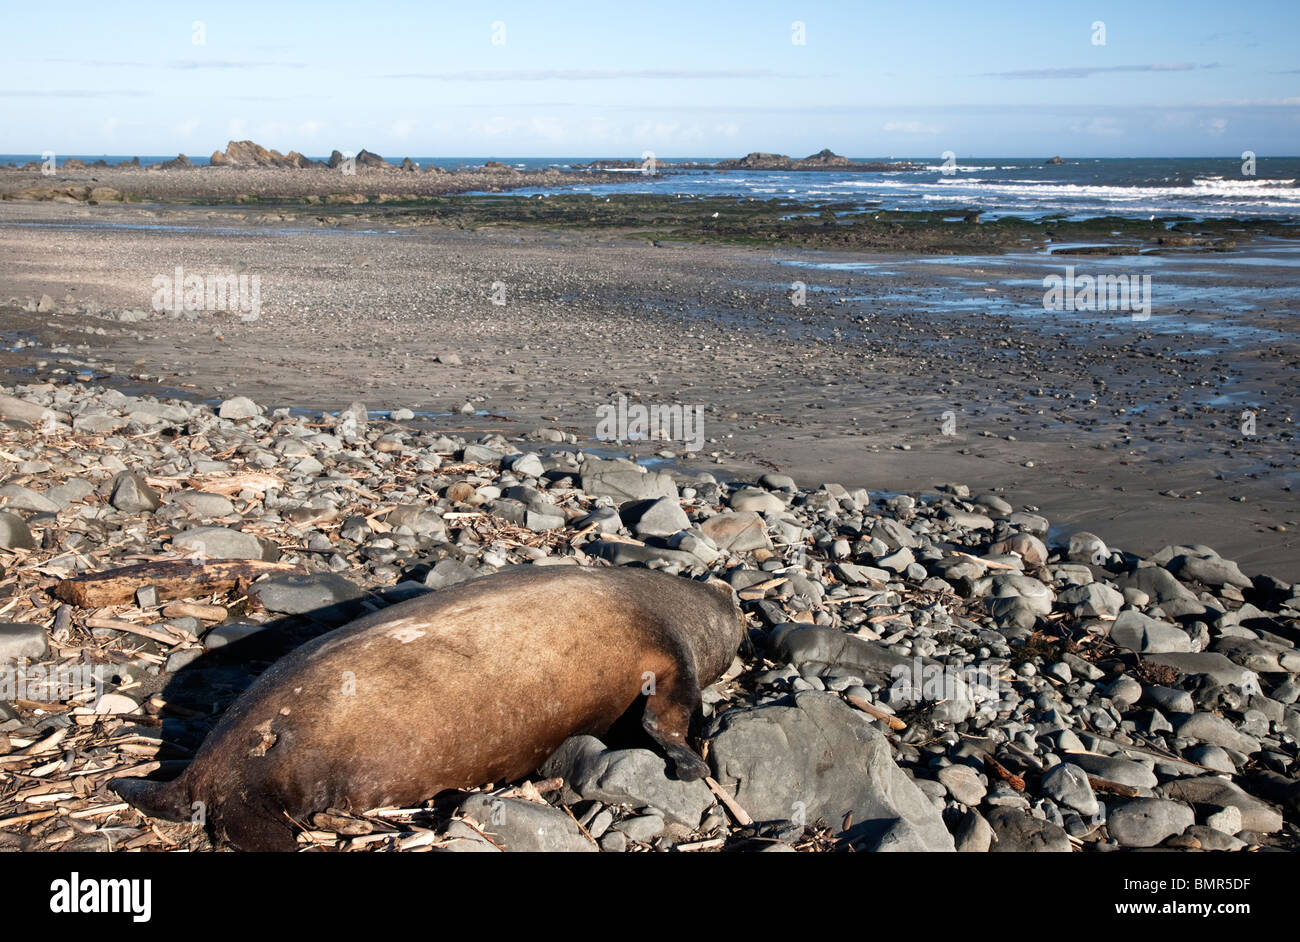 Deceased 'crested' Sea Lion bull, low tide, beach, morning light, California, Stock Photo